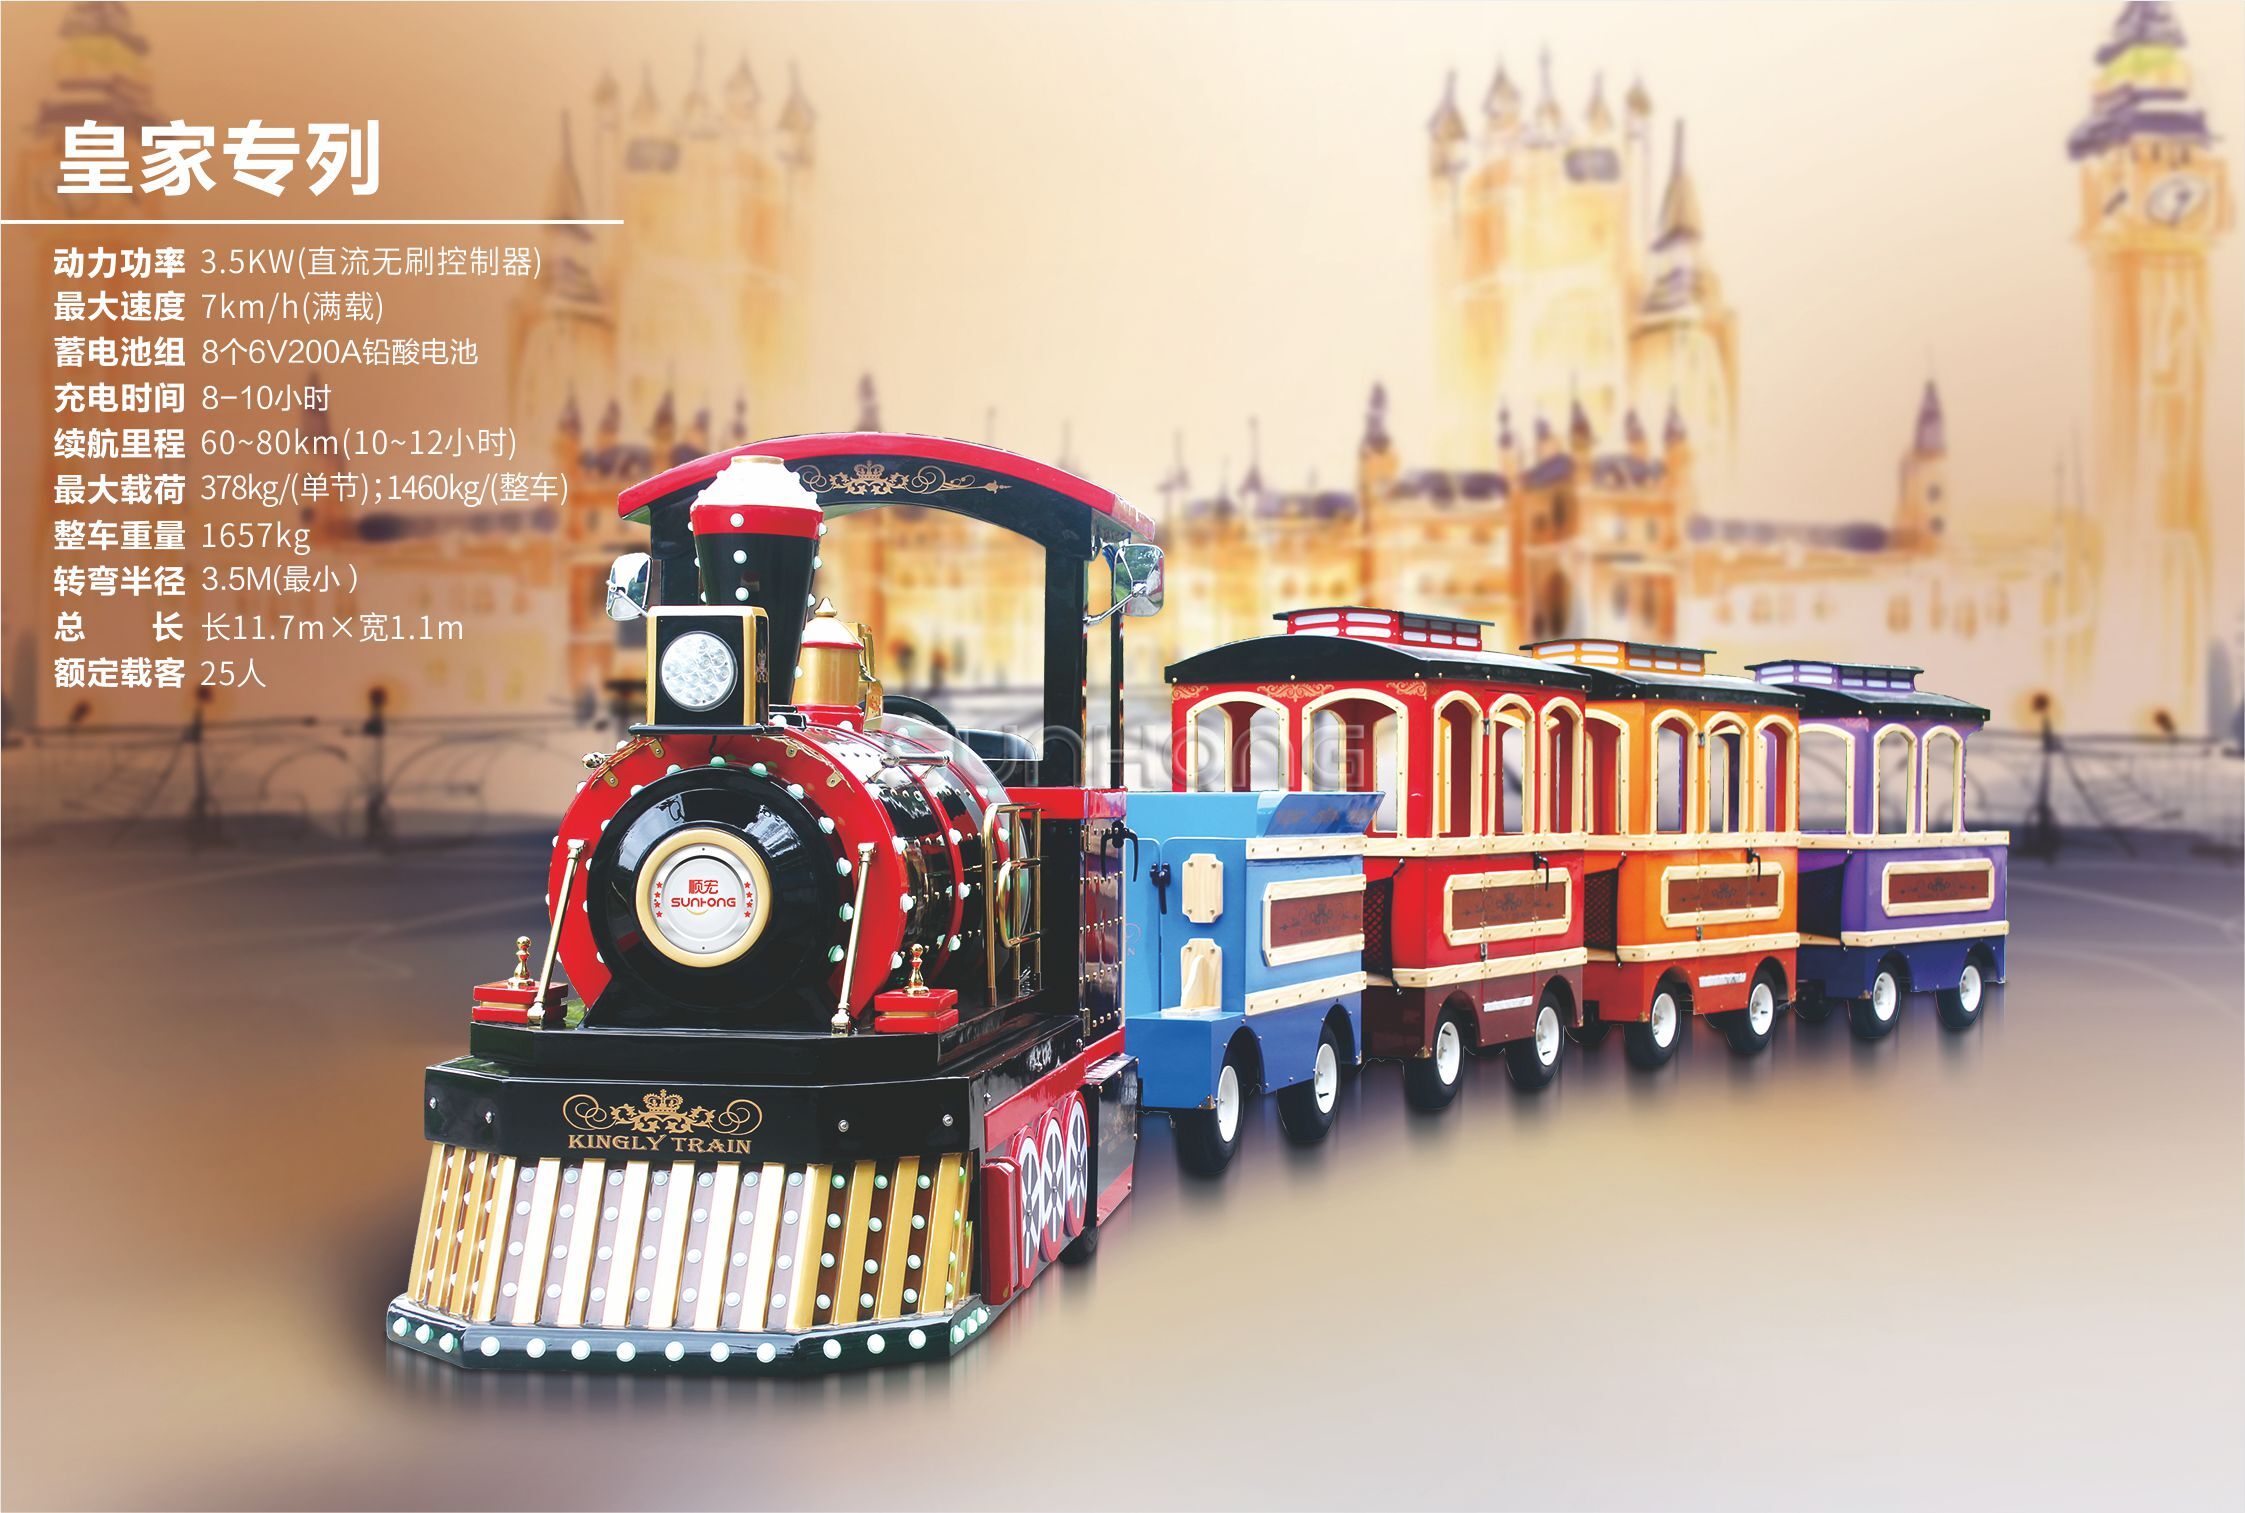 good price and quality trackless sightseeing train